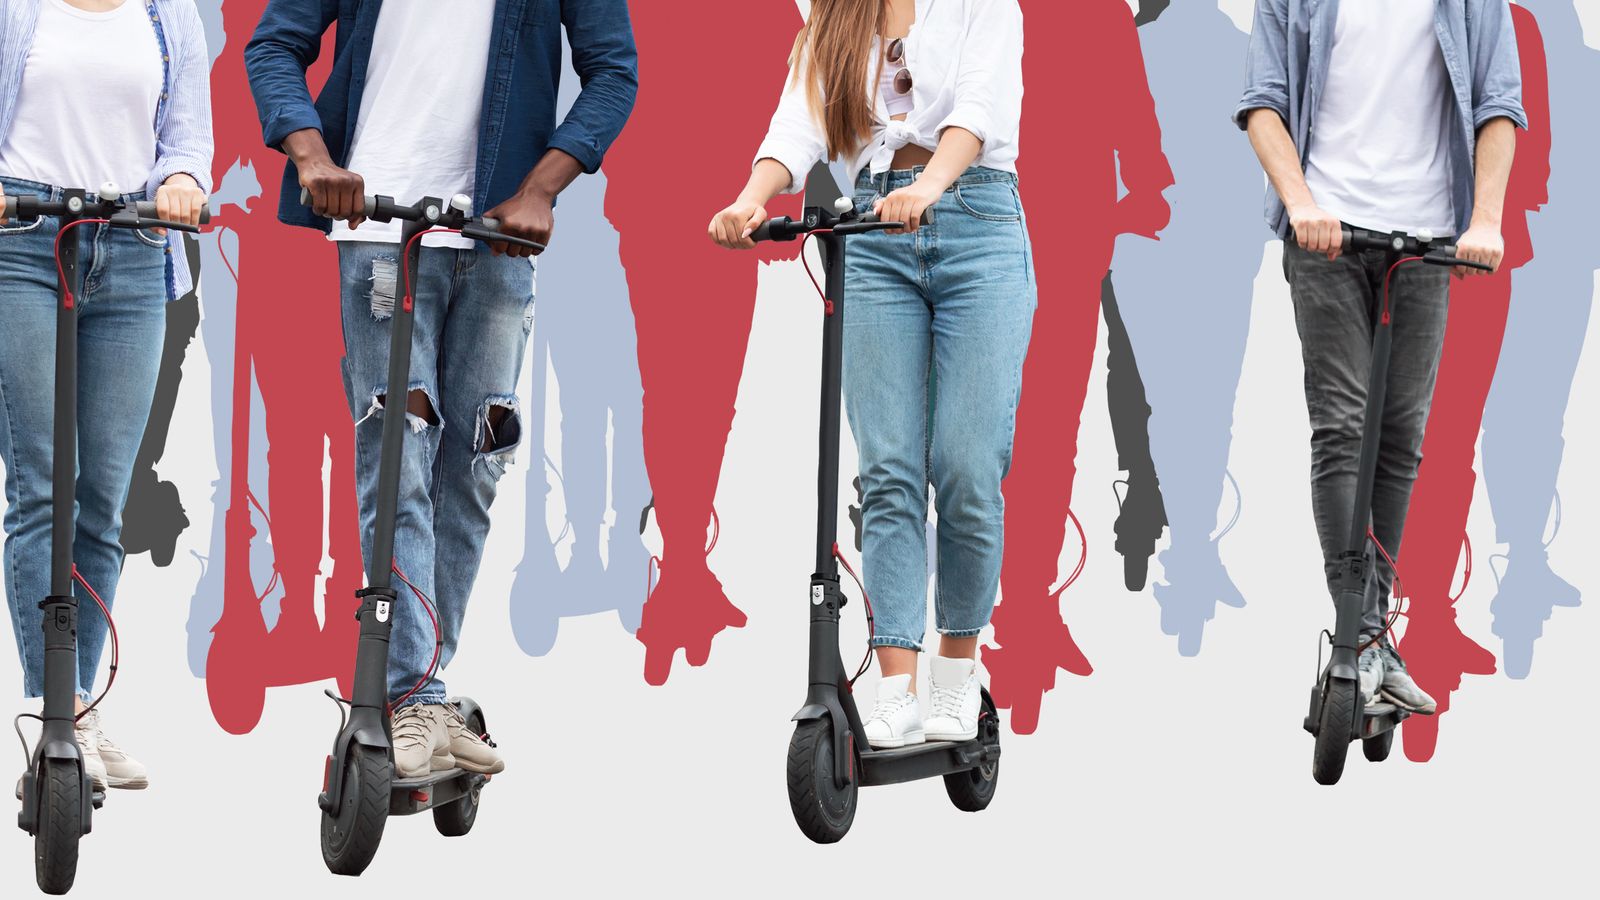 Number of e-scooters on UK roads set to soar - why not everyone's pleased about it